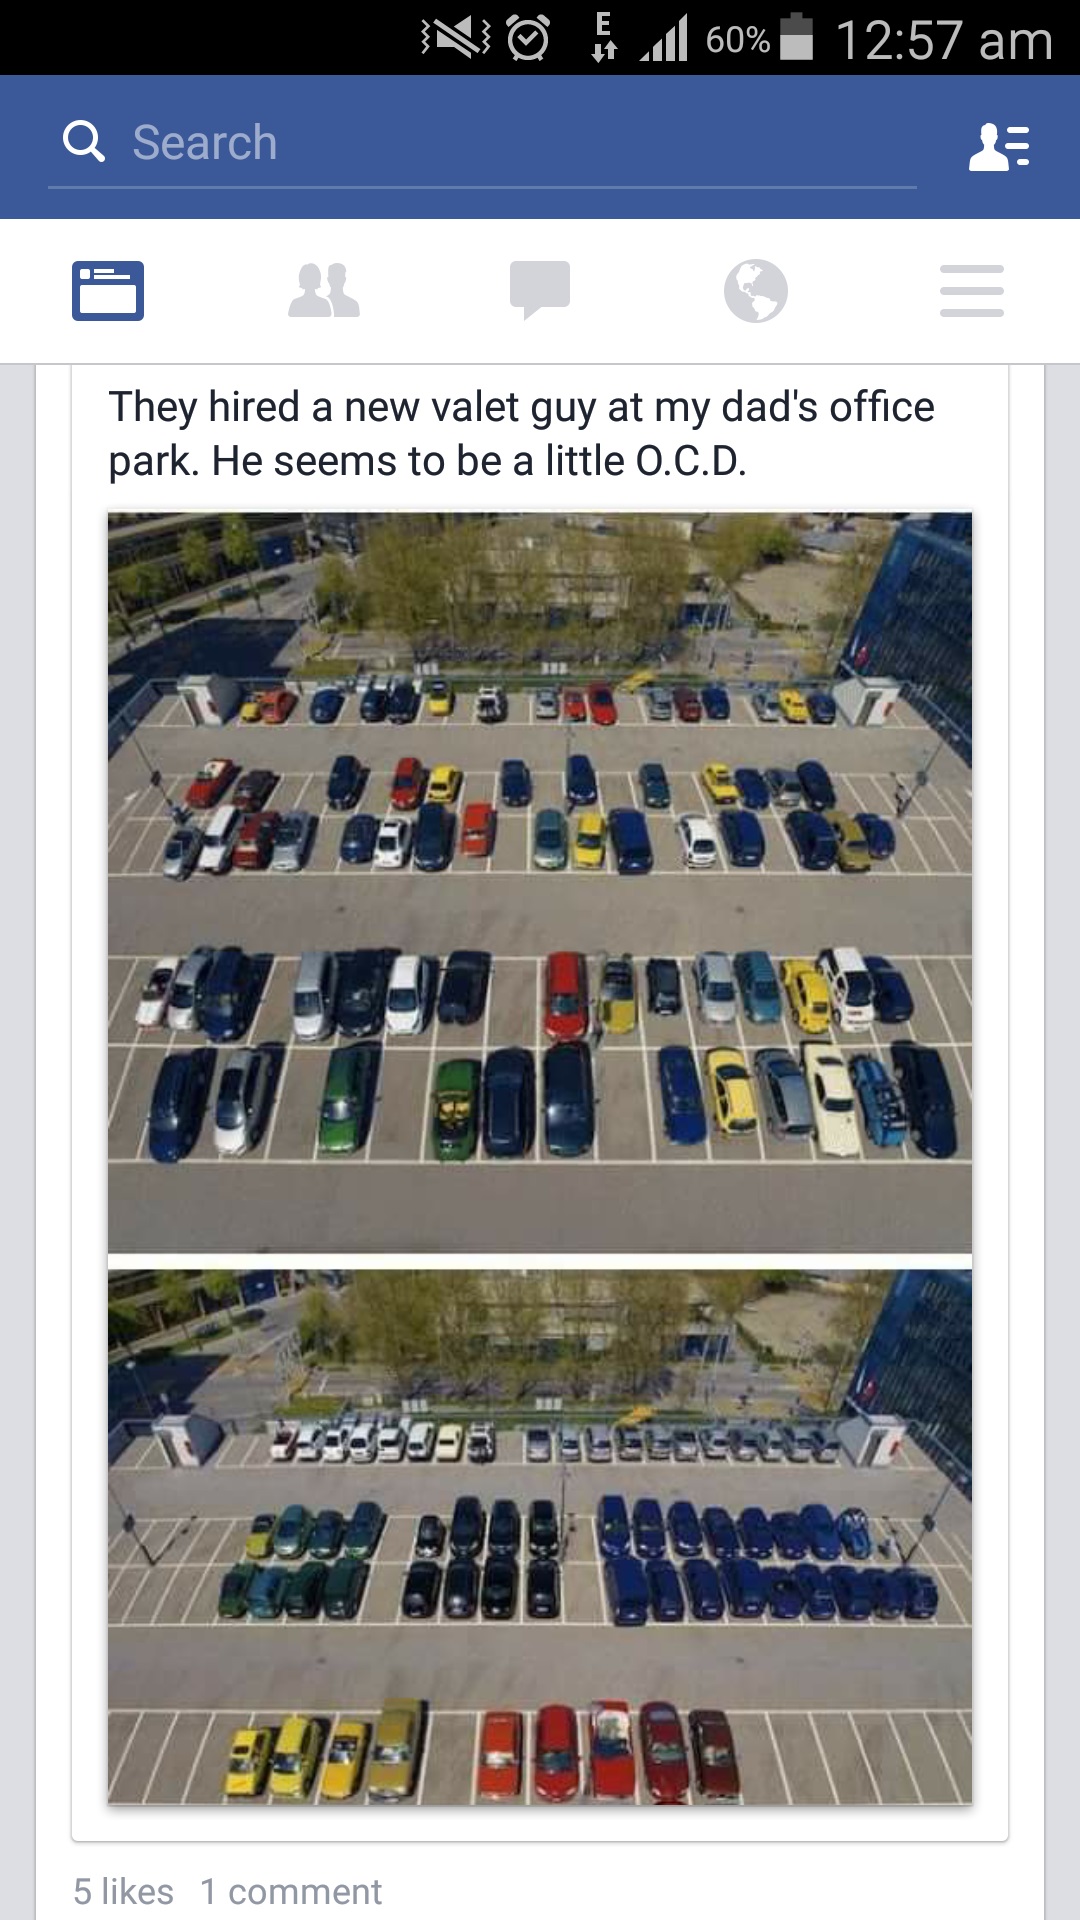 ocd valet parking - No 60% a Search They hired a new valet guy at my dad's office park. He seems to be a little O.C.D. 199956 Deelhe 5 1 comment